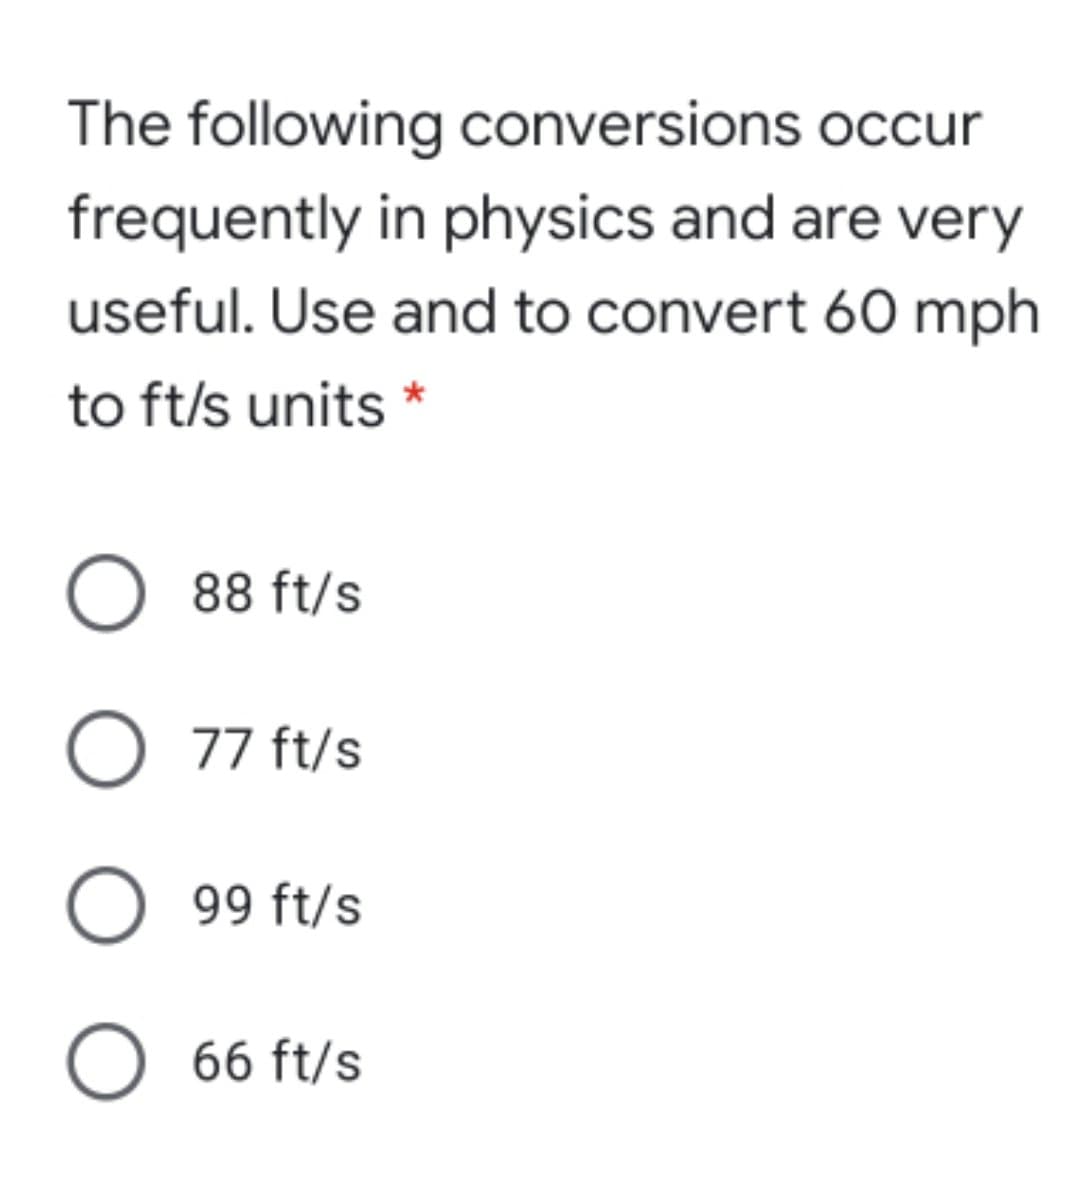 The following conversions occur
frequently in physics and are very
useful. Use and to convert 60 mph
to ft/s units *
O 88 ft/s
O 77 ft/s
O 99 ft/s
O 66 ft/s
